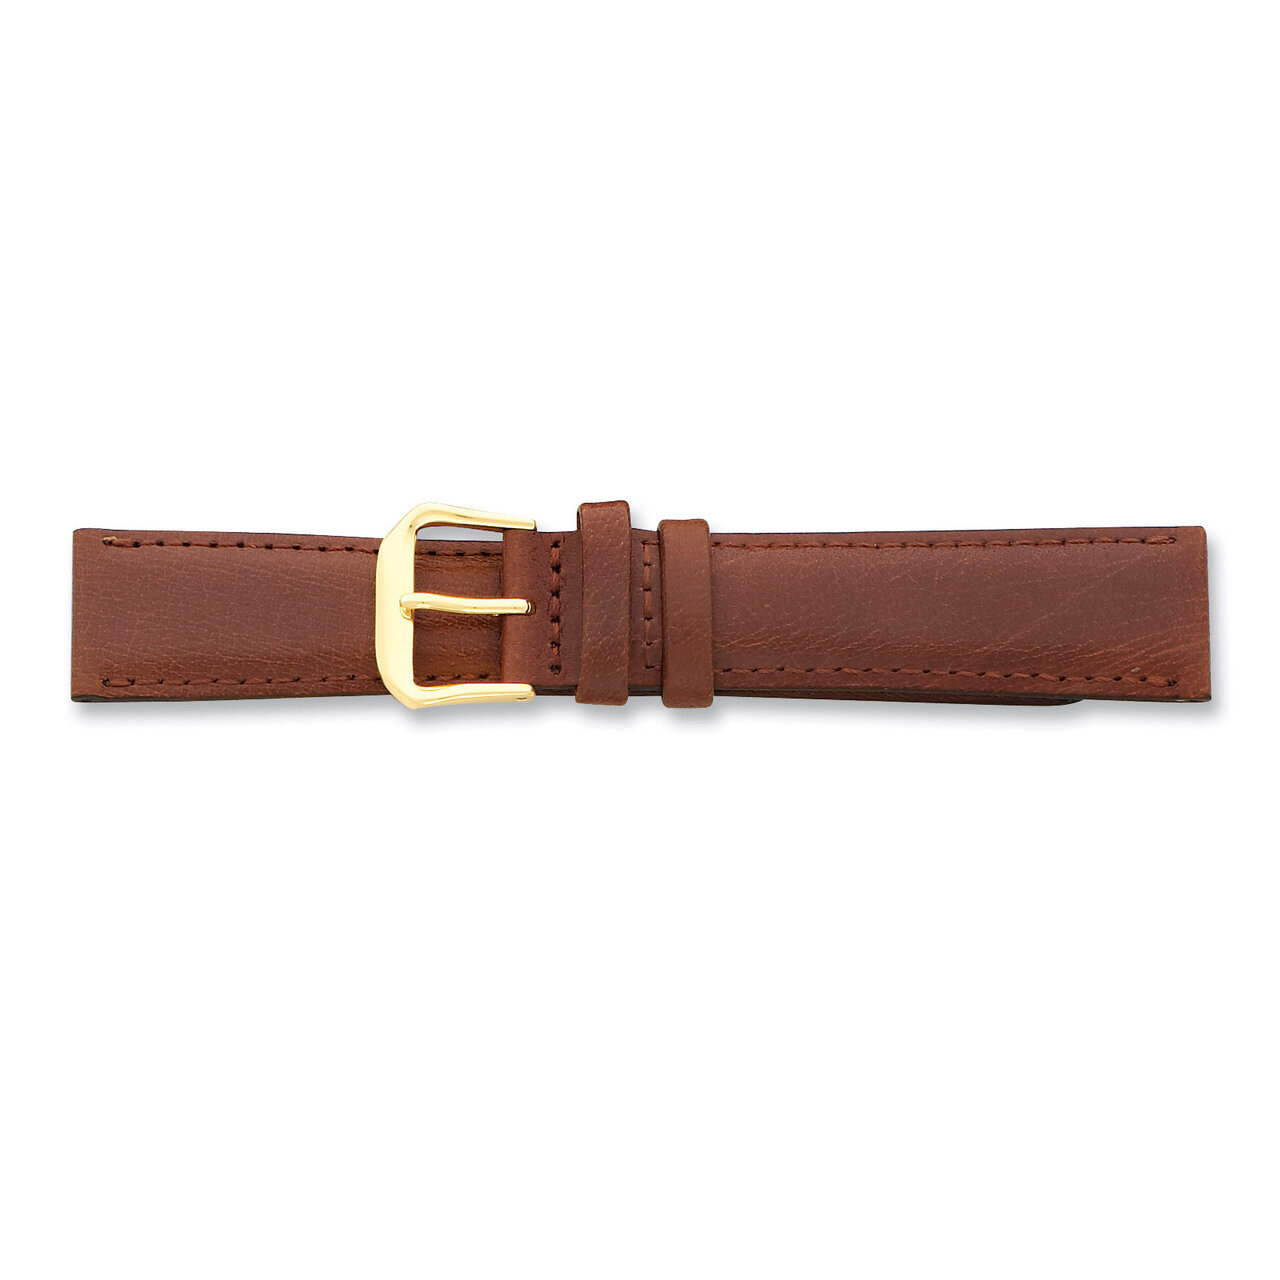 13mm Havana Smooth Leather Buckle Watch Band 6.75 Inch Gold-tone BA117-13